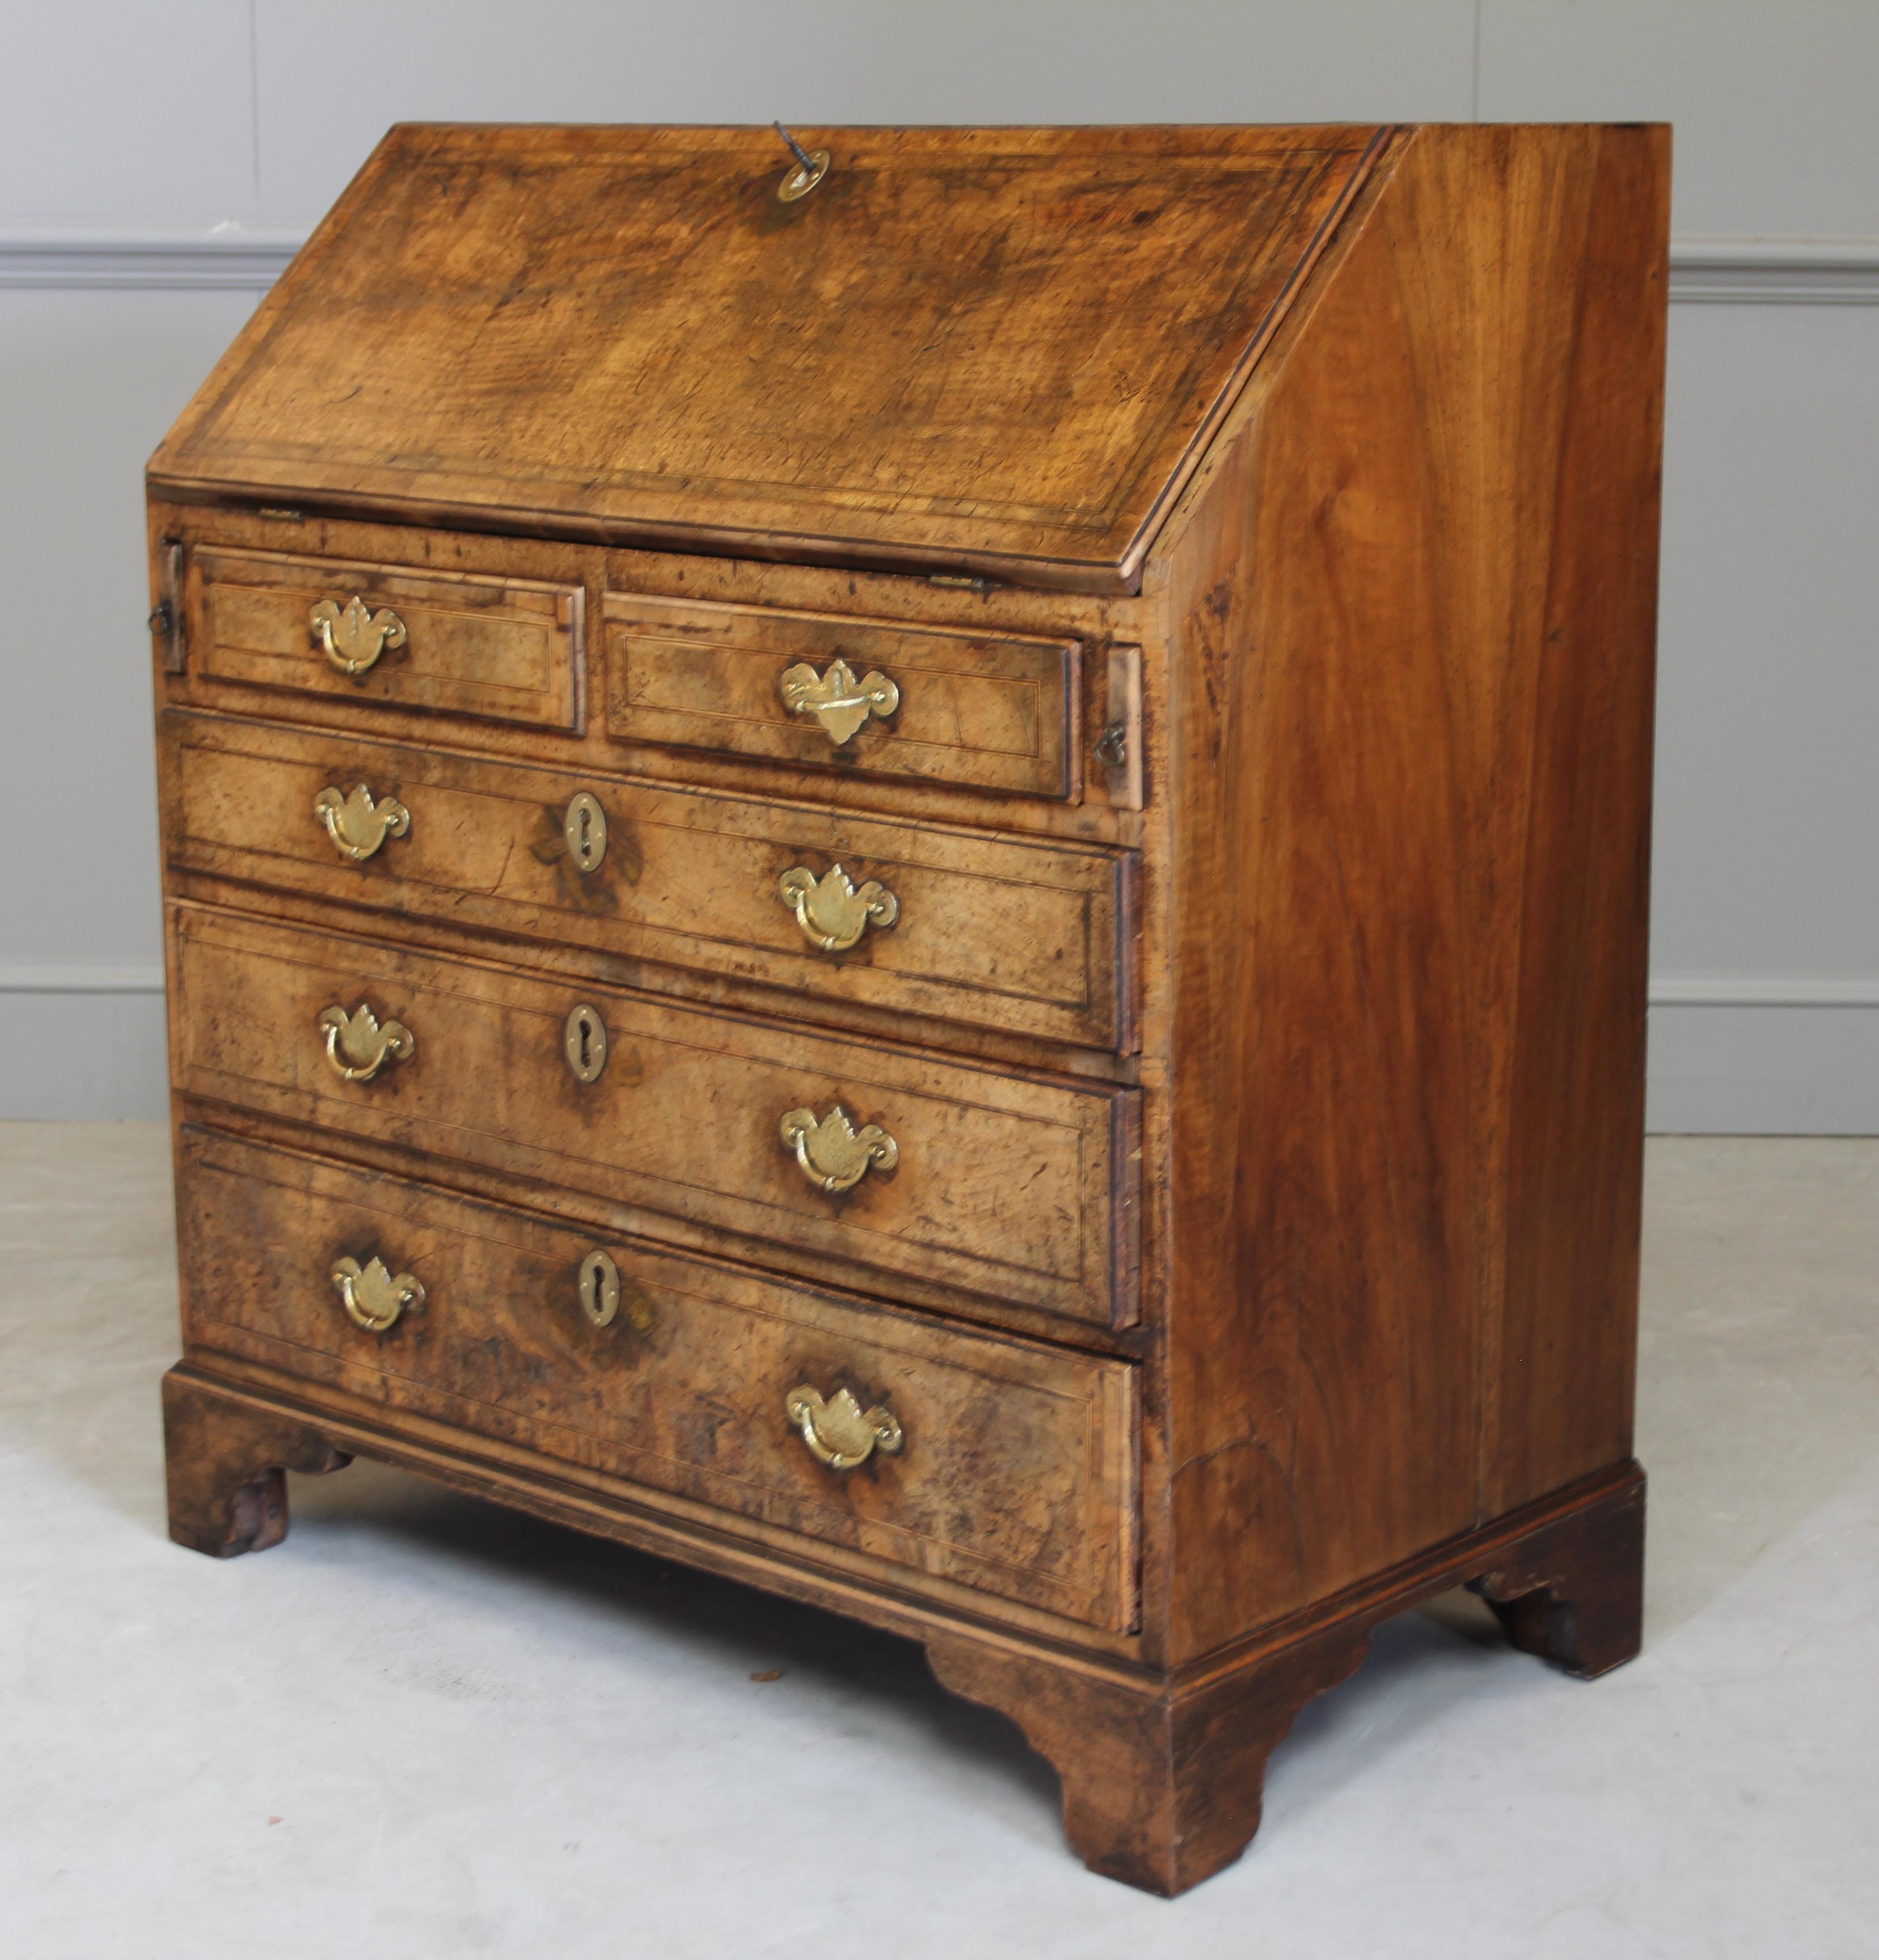 A George III burr walnut bureau with boxwood and ebony inlay, The sloping full enclosed pigeonholes and drawers over two short and three graduated drawers on bracket feet. with a working lock and key for safe storage.
Coming from the period of King